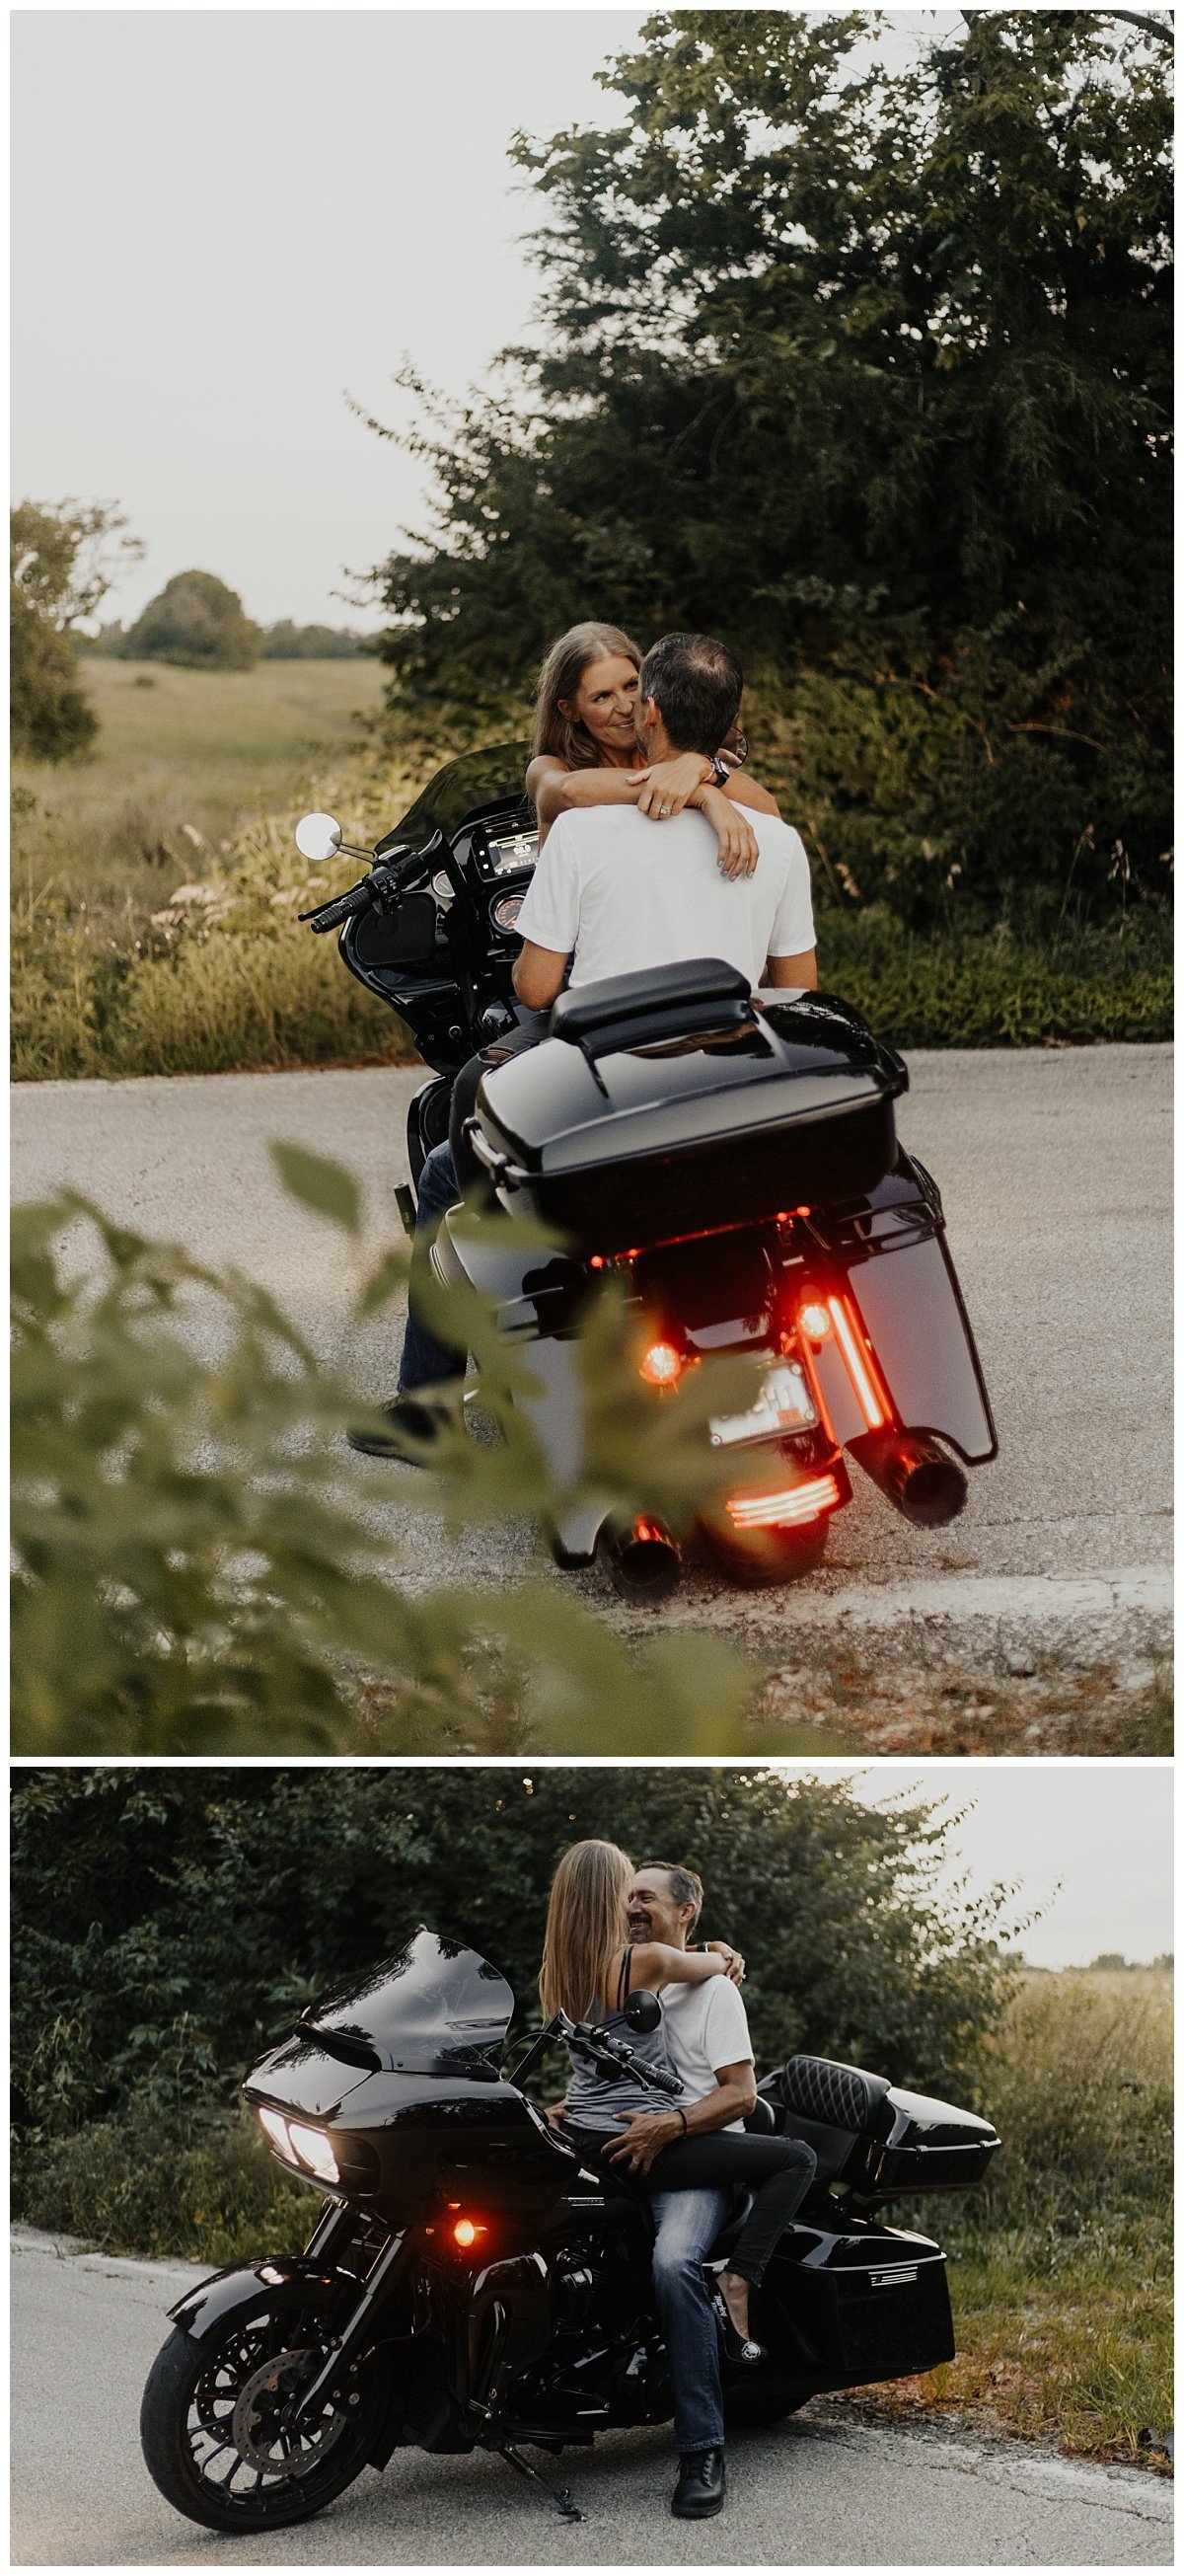 motorcycle+session+_+adventure+session+_+engagement+session+_+motorcycle+photos+_+lana+del+rey+_+ride+or+die+_+adventurous+couple+_+kansas+city+photographer+_+kansas+city+photography (14).jpeg